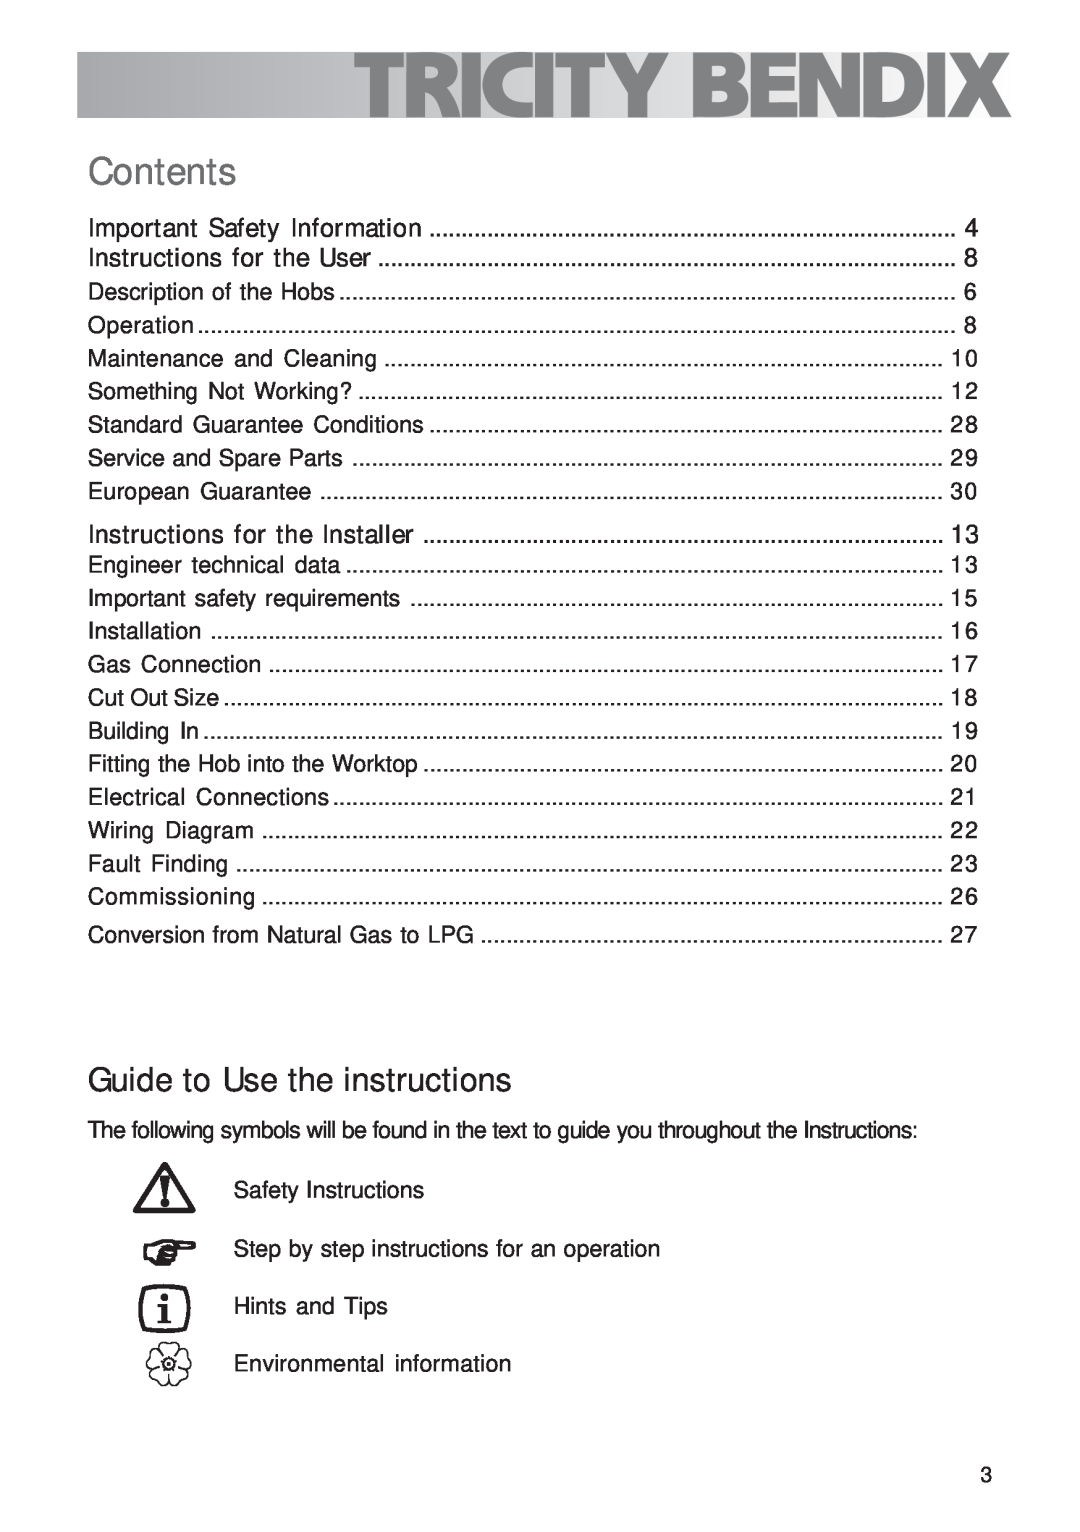 Tricity Bendix TBG700 user manual Contents, Guide to Use the instructions 